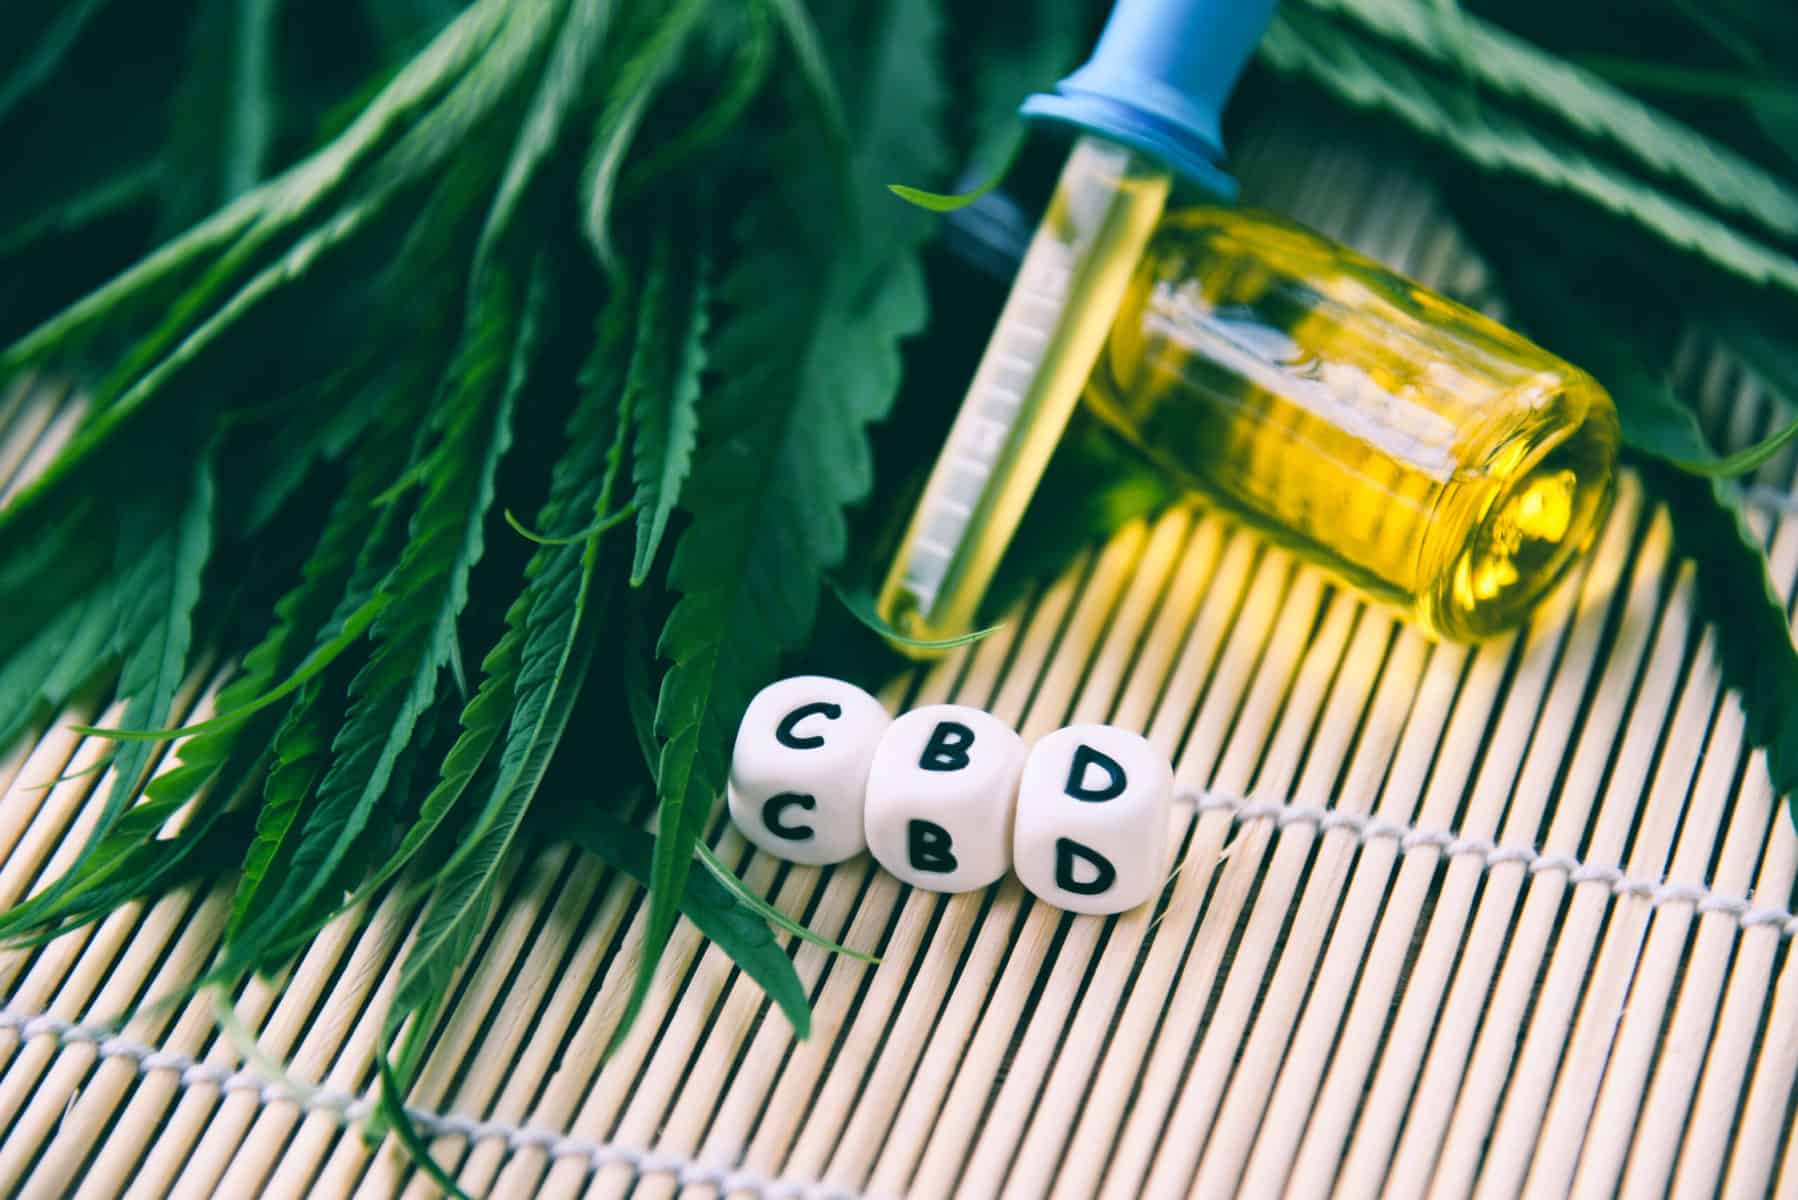 How to Store CBD Oil & Other Hemp Supplements